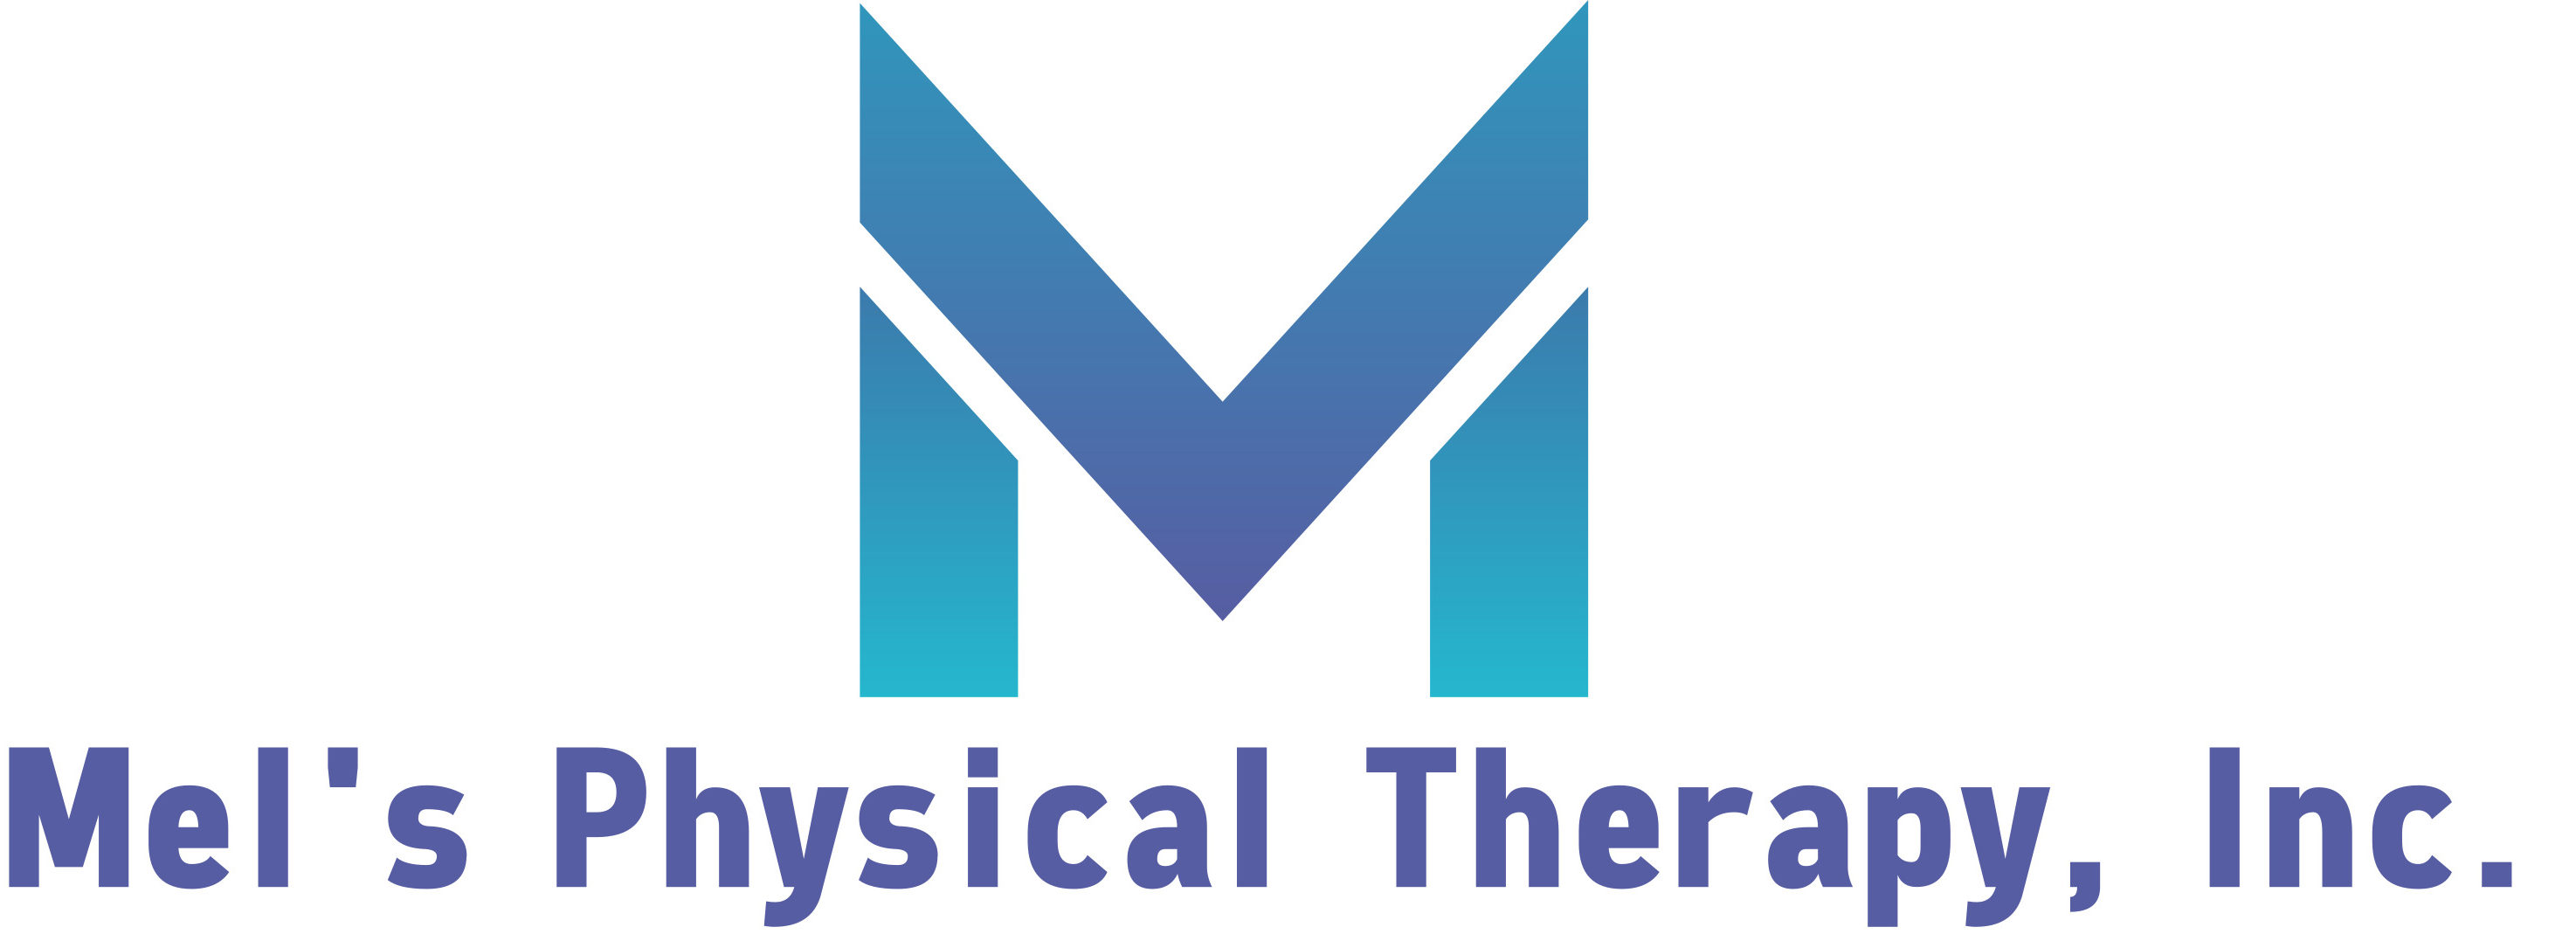 Mel's Physical Therapy - Outpatient Physical Therapy and Wellness